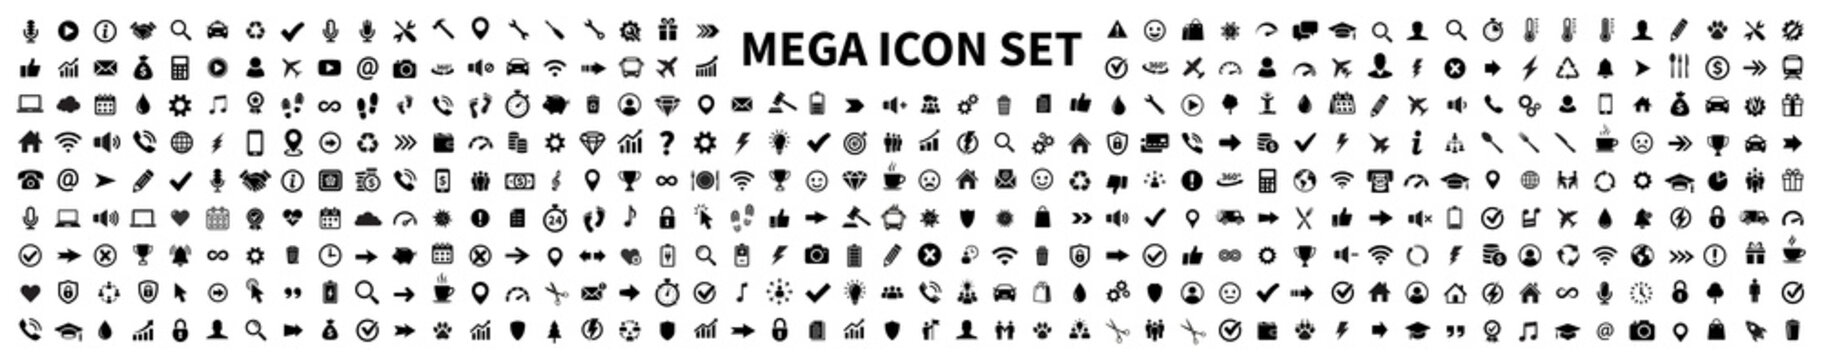 Mega set of icons. Collection icon: business, ecommerce, shopping, device, technology, finance, accounting, transport and many more - stock vector.